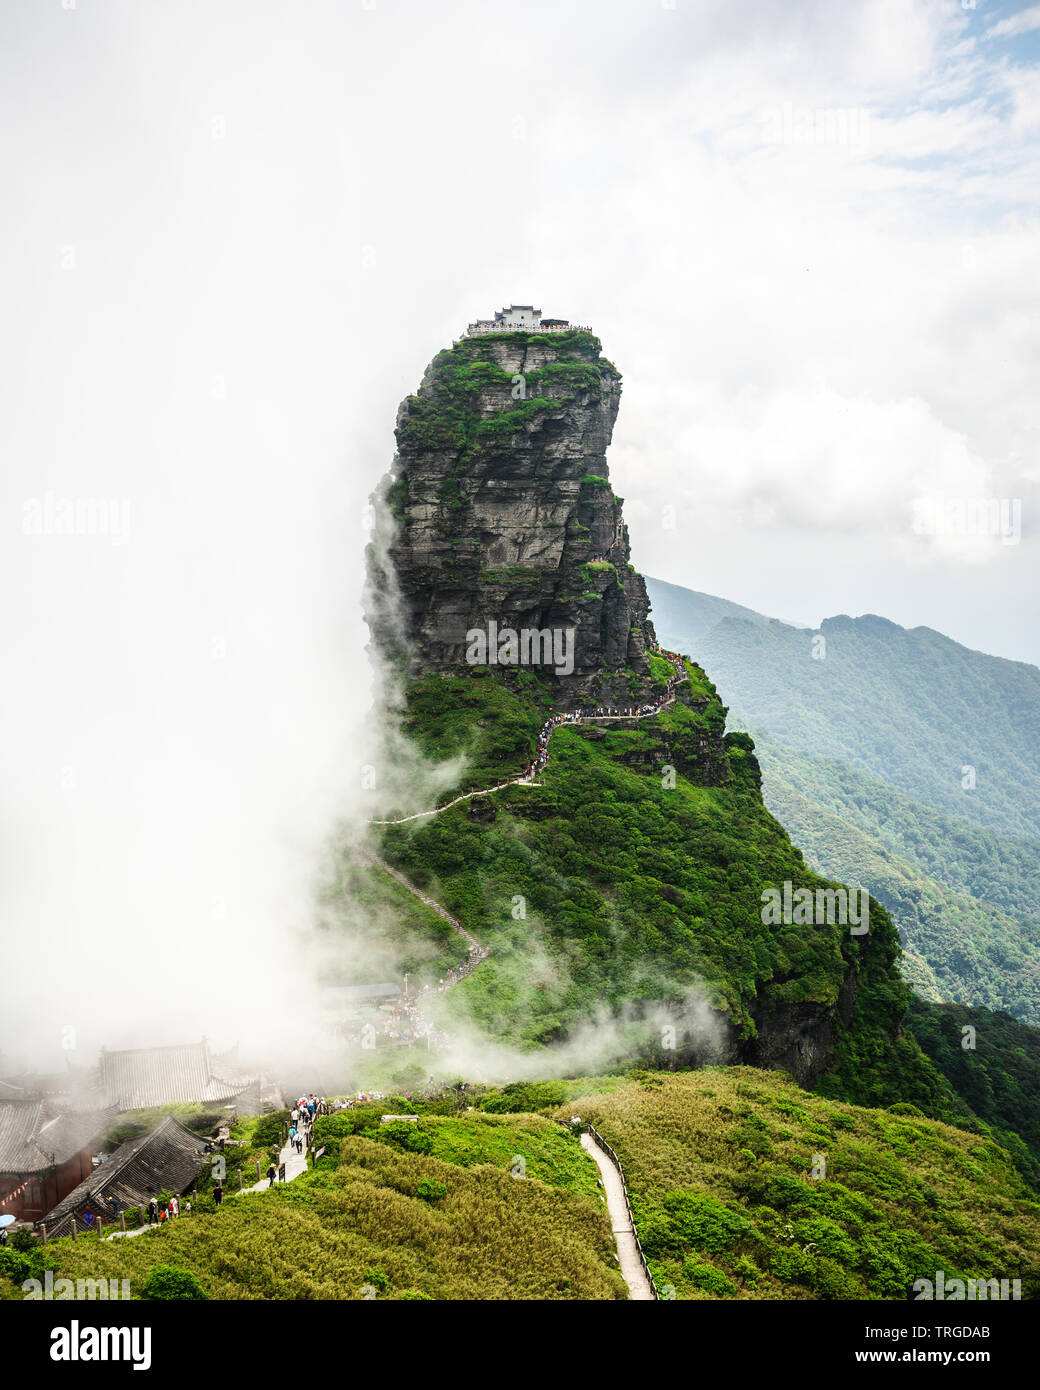 Fanjingshan mountain scenery with view of the red cloud golden peak with Buddhist temple on the top in the clouds in Guizhou China Stock Photo